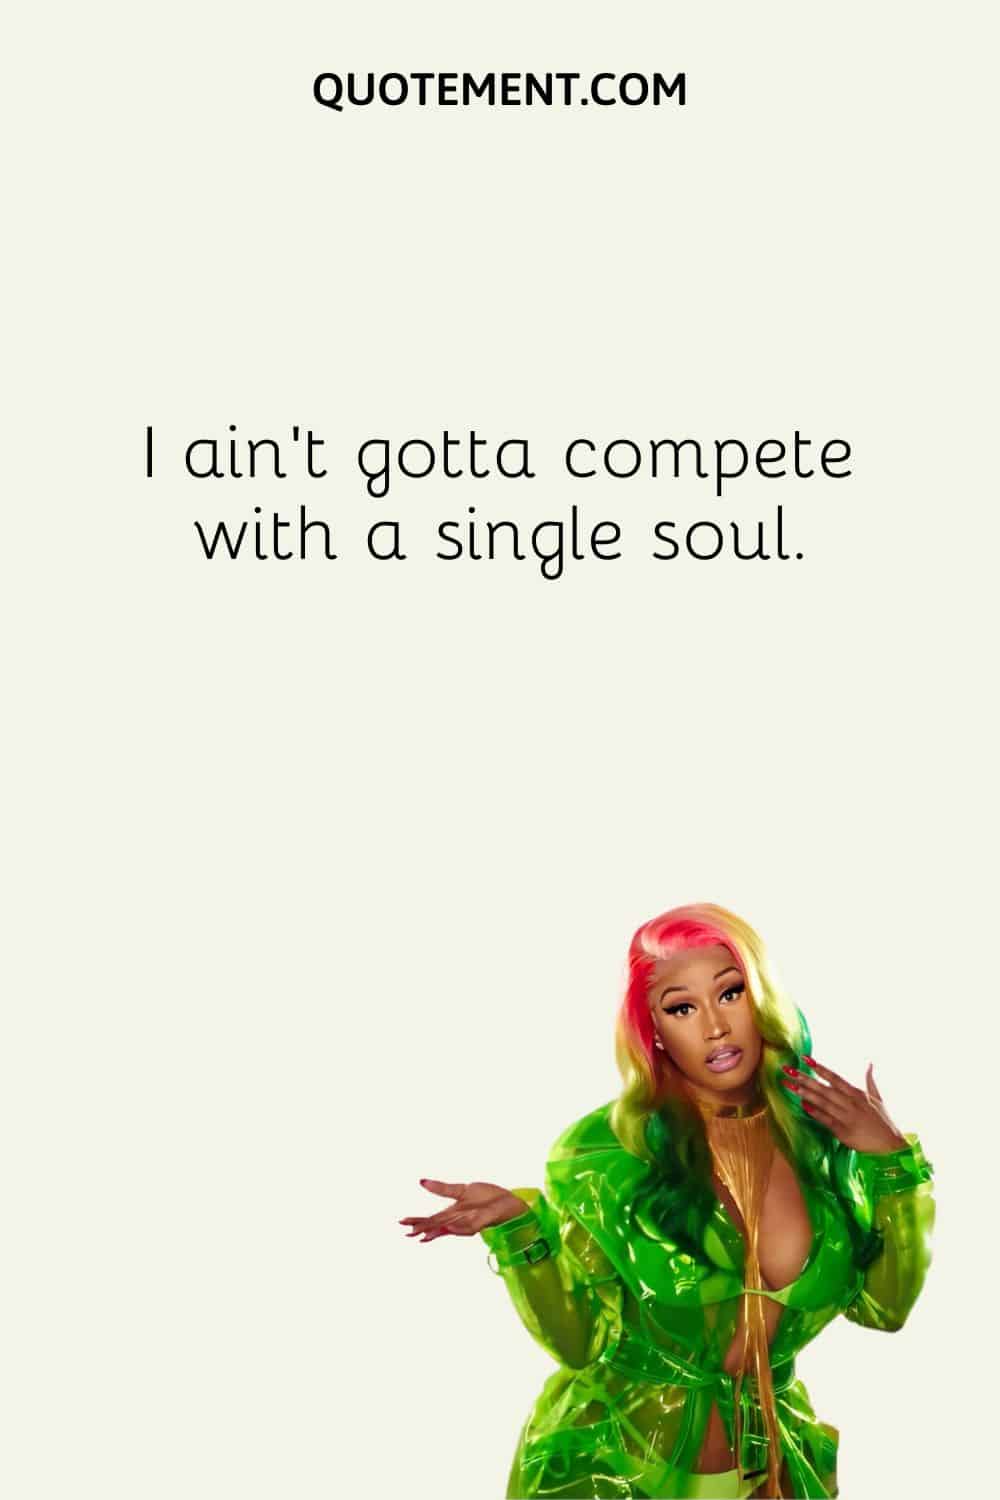 I ain’t gotta compete with a single soul